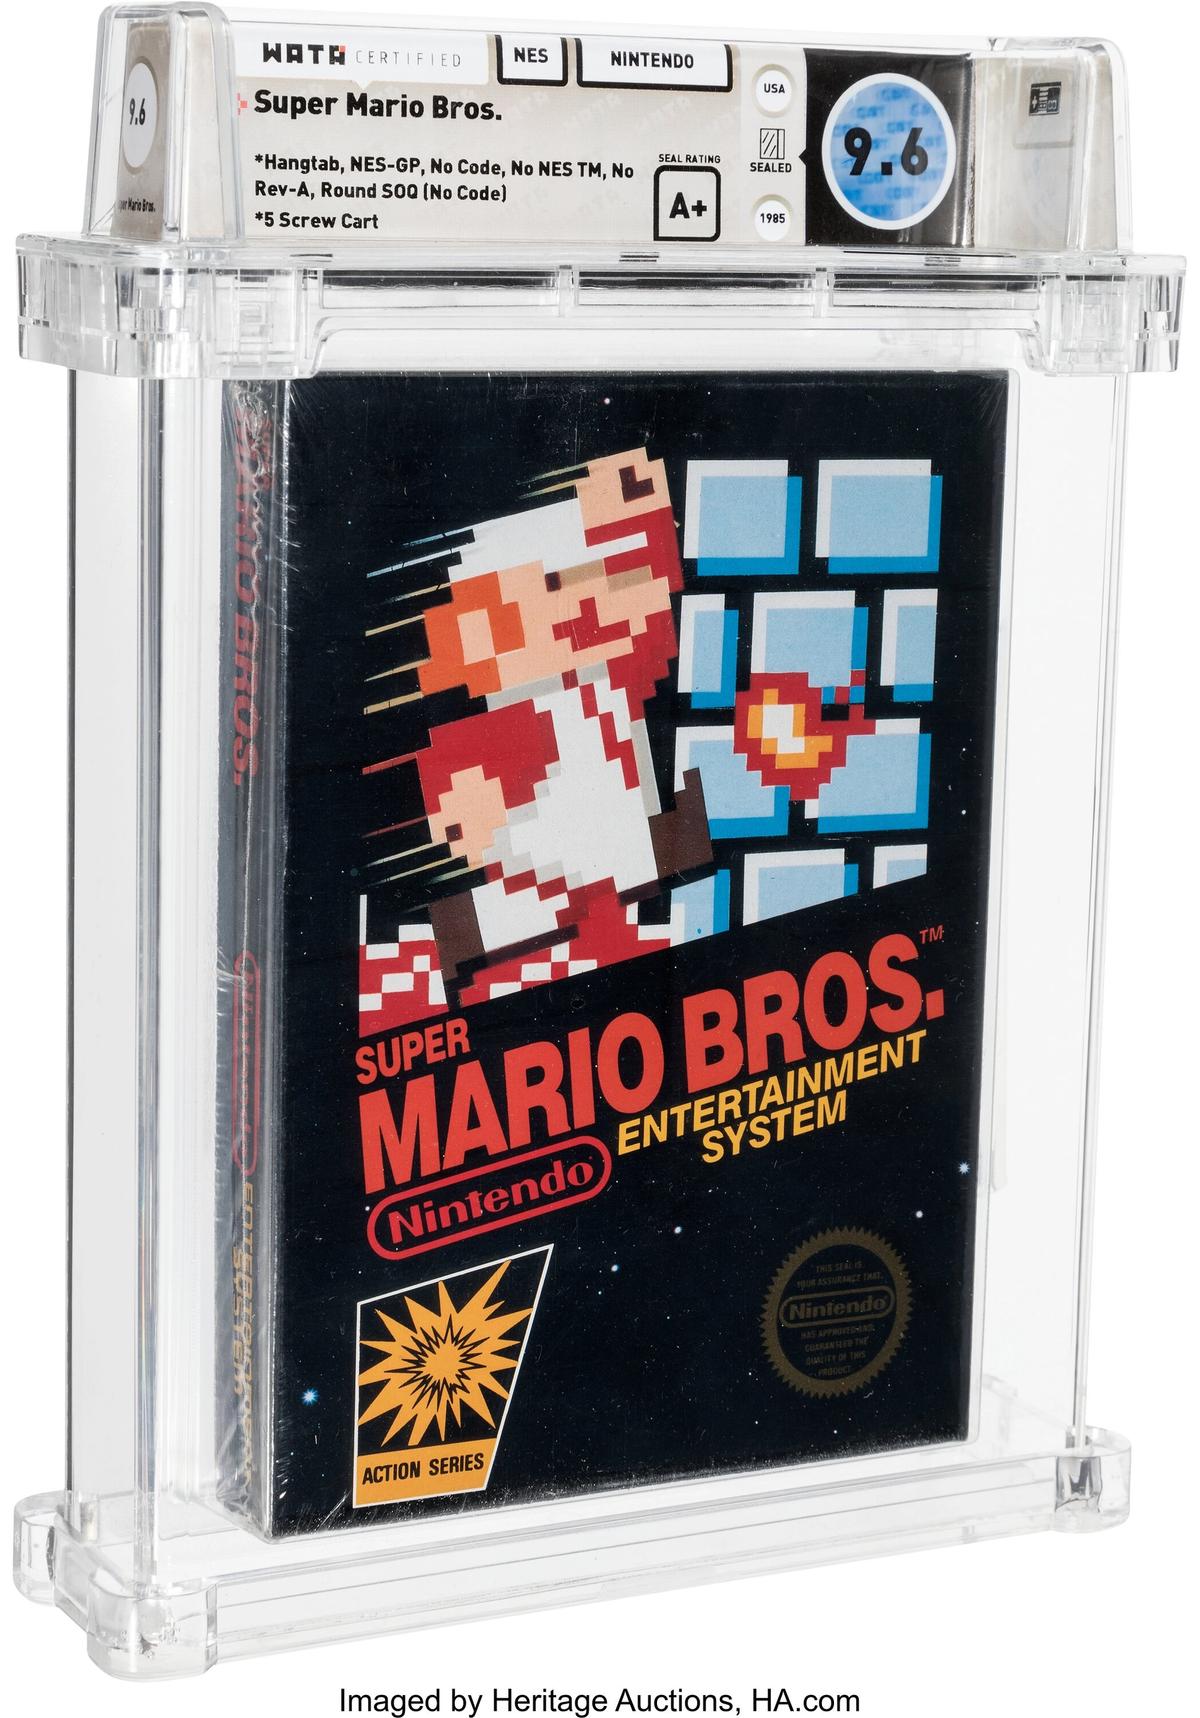 This sealed copy of Super Mario Bros. recently sold for $660,000 at auction. Courtesy of Heritage Auctions